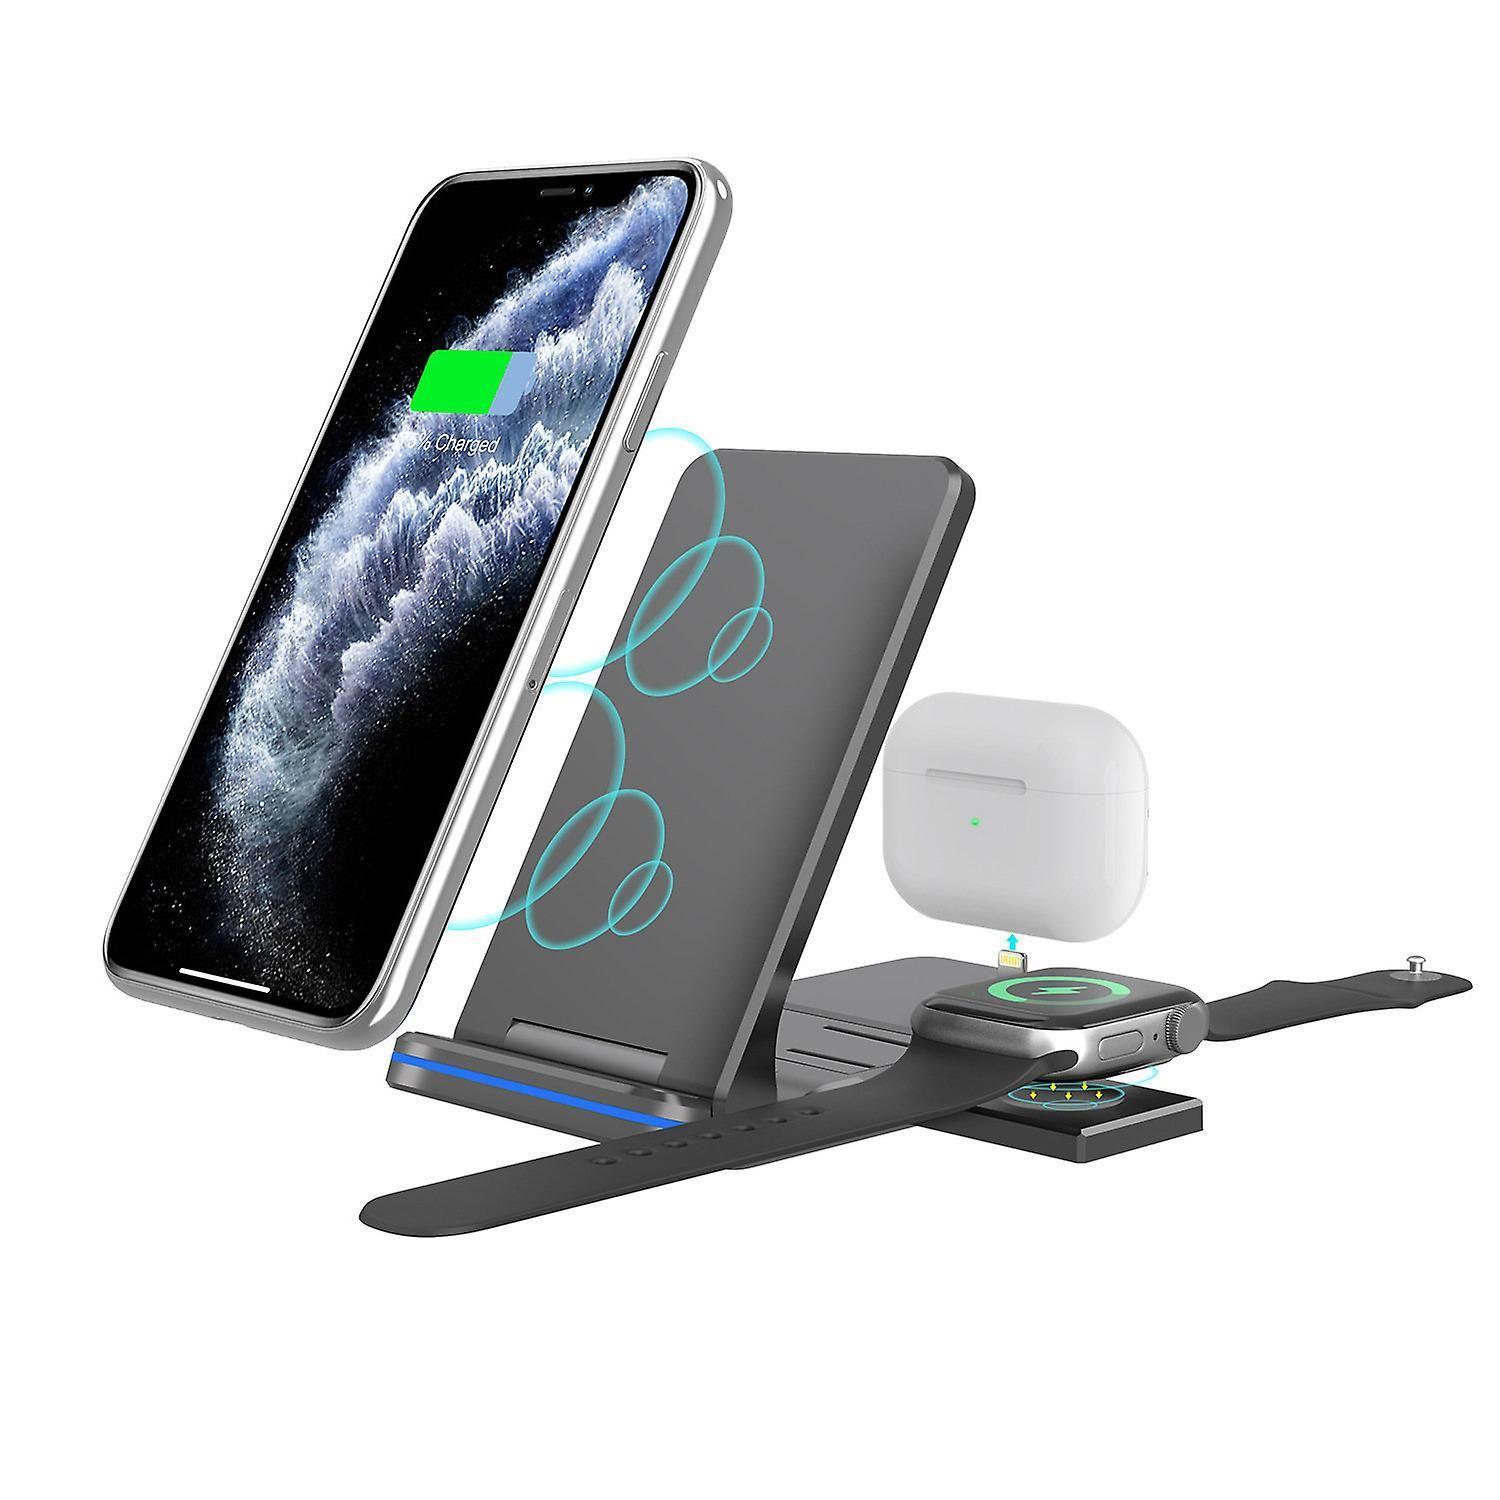 3 in 1 Wireless Charger,Wireless Charging Pad Compatible With iPhone XS/XS Max/XR/X / 8/8 Plus, Fast Charging For Samsung Galaxy S9 /S8 /S7 /S7 Edge/Note 8,（black）